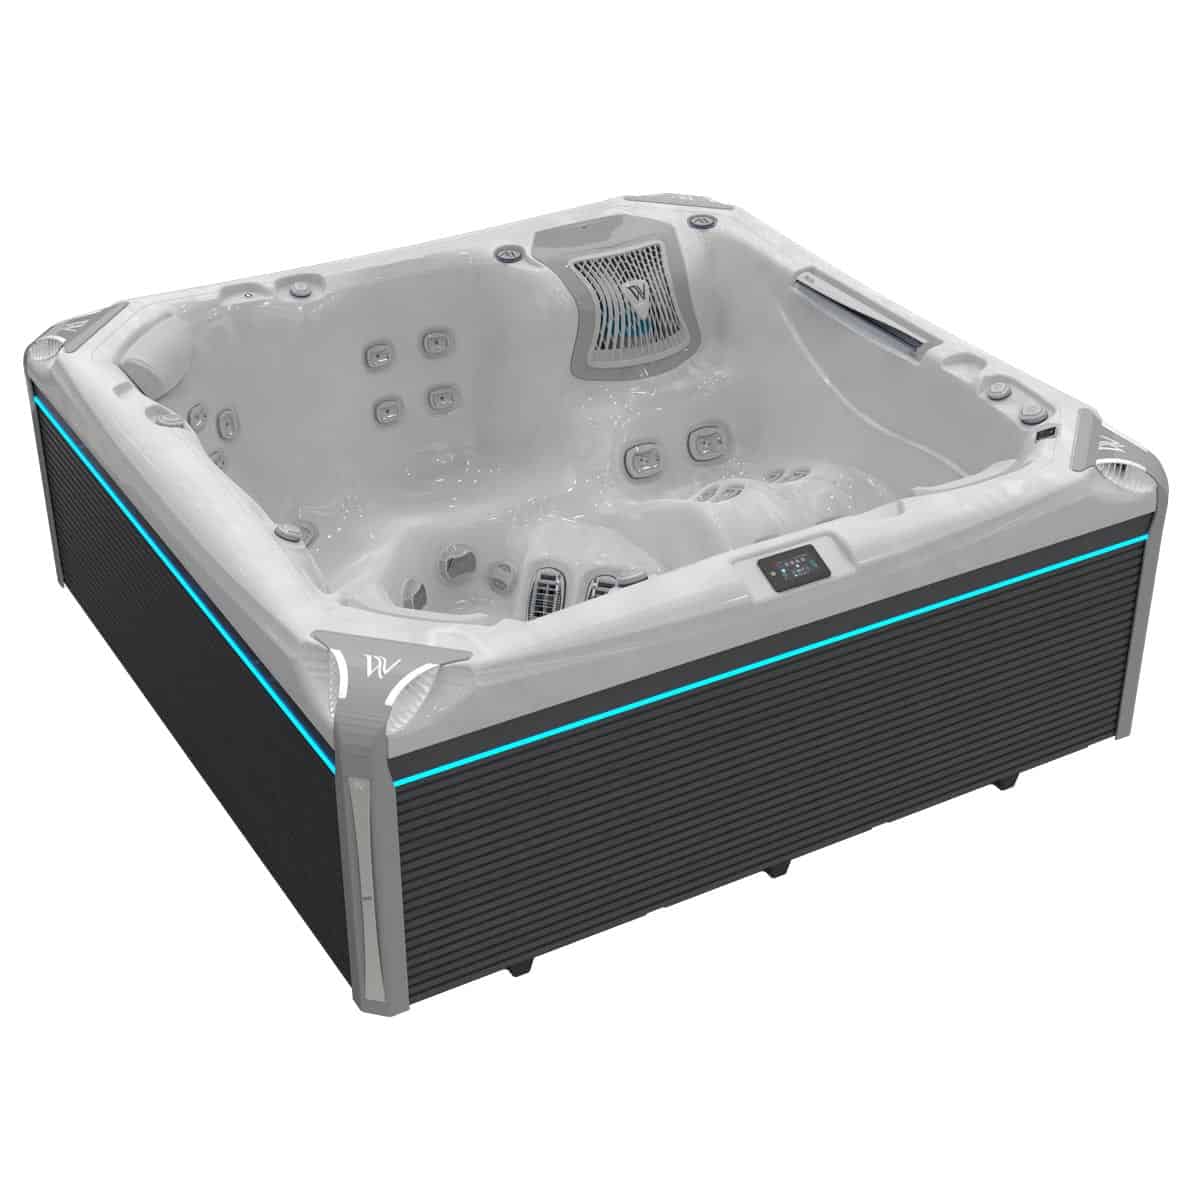 Kilimanjaro Life 6-Person Hot Tub with Lounger | Wellis®